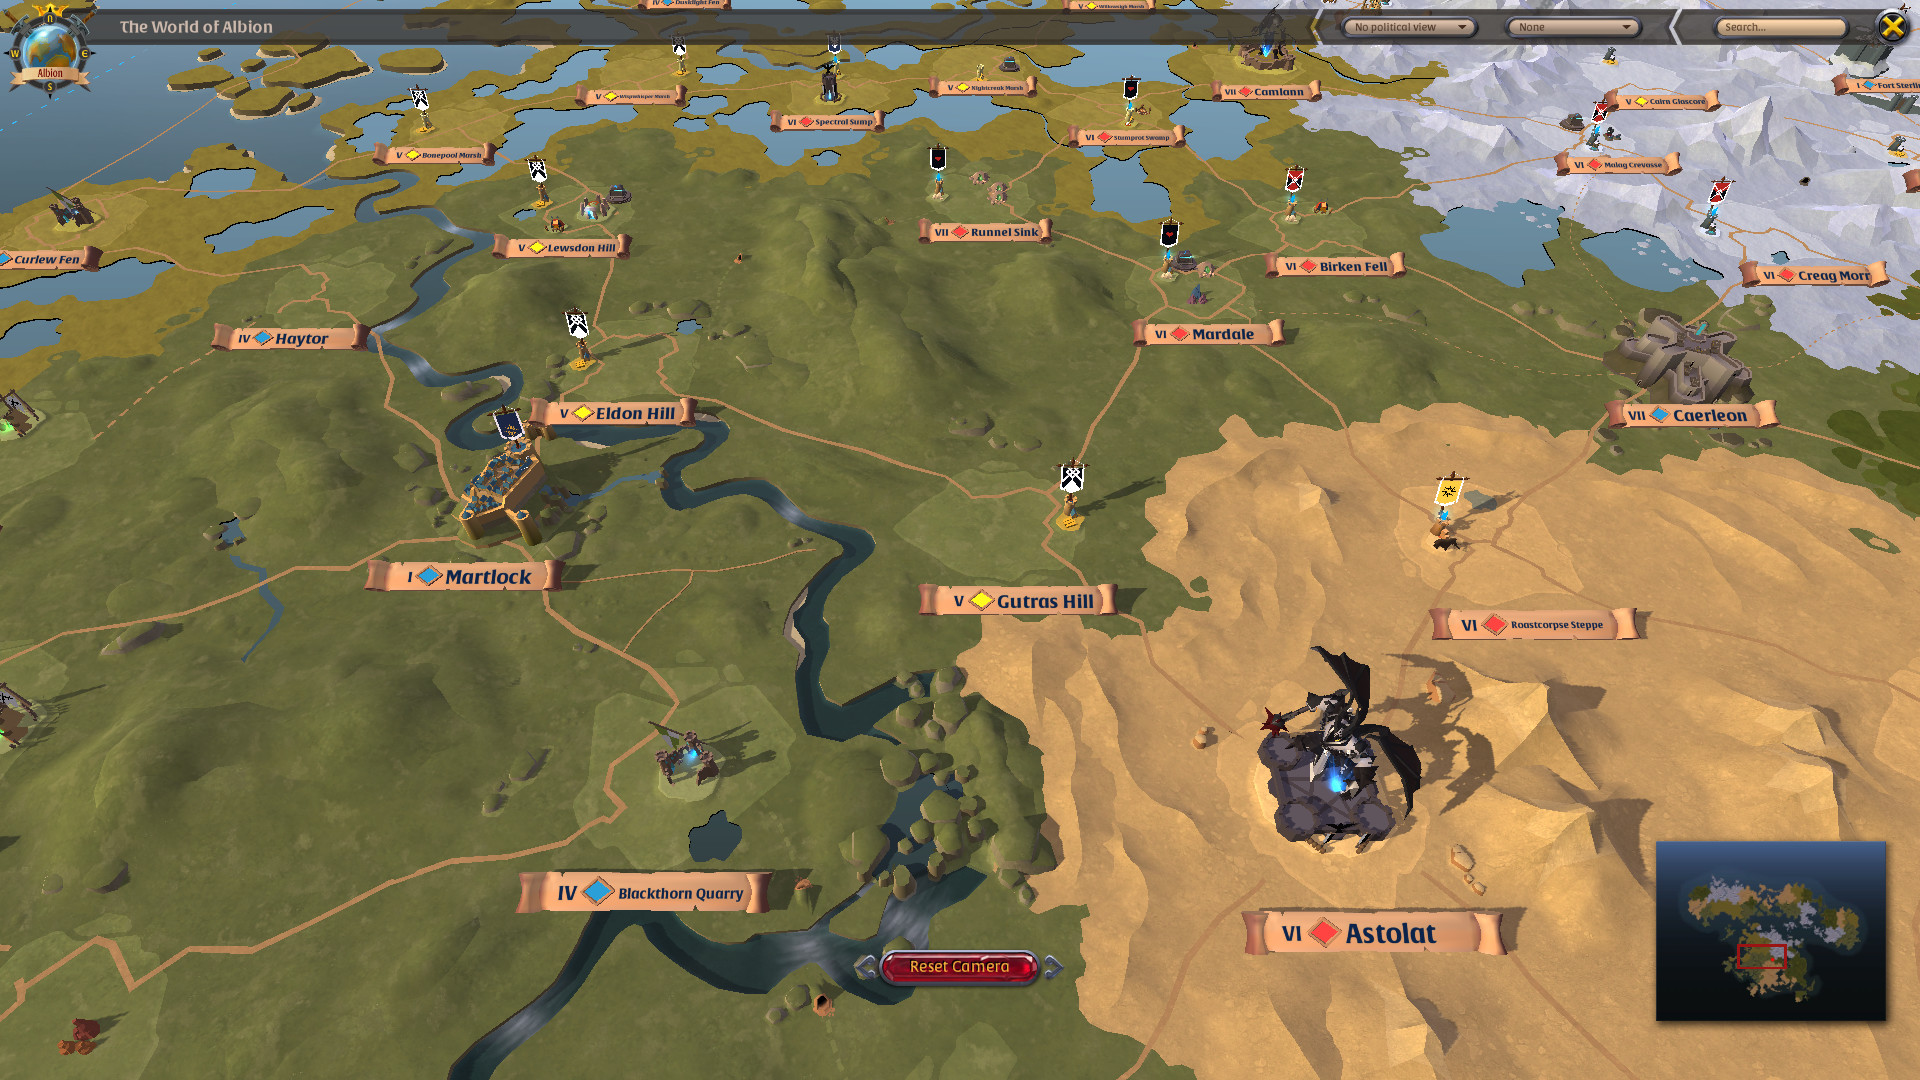 Play Albion Online Online for Free on PC & Mobile